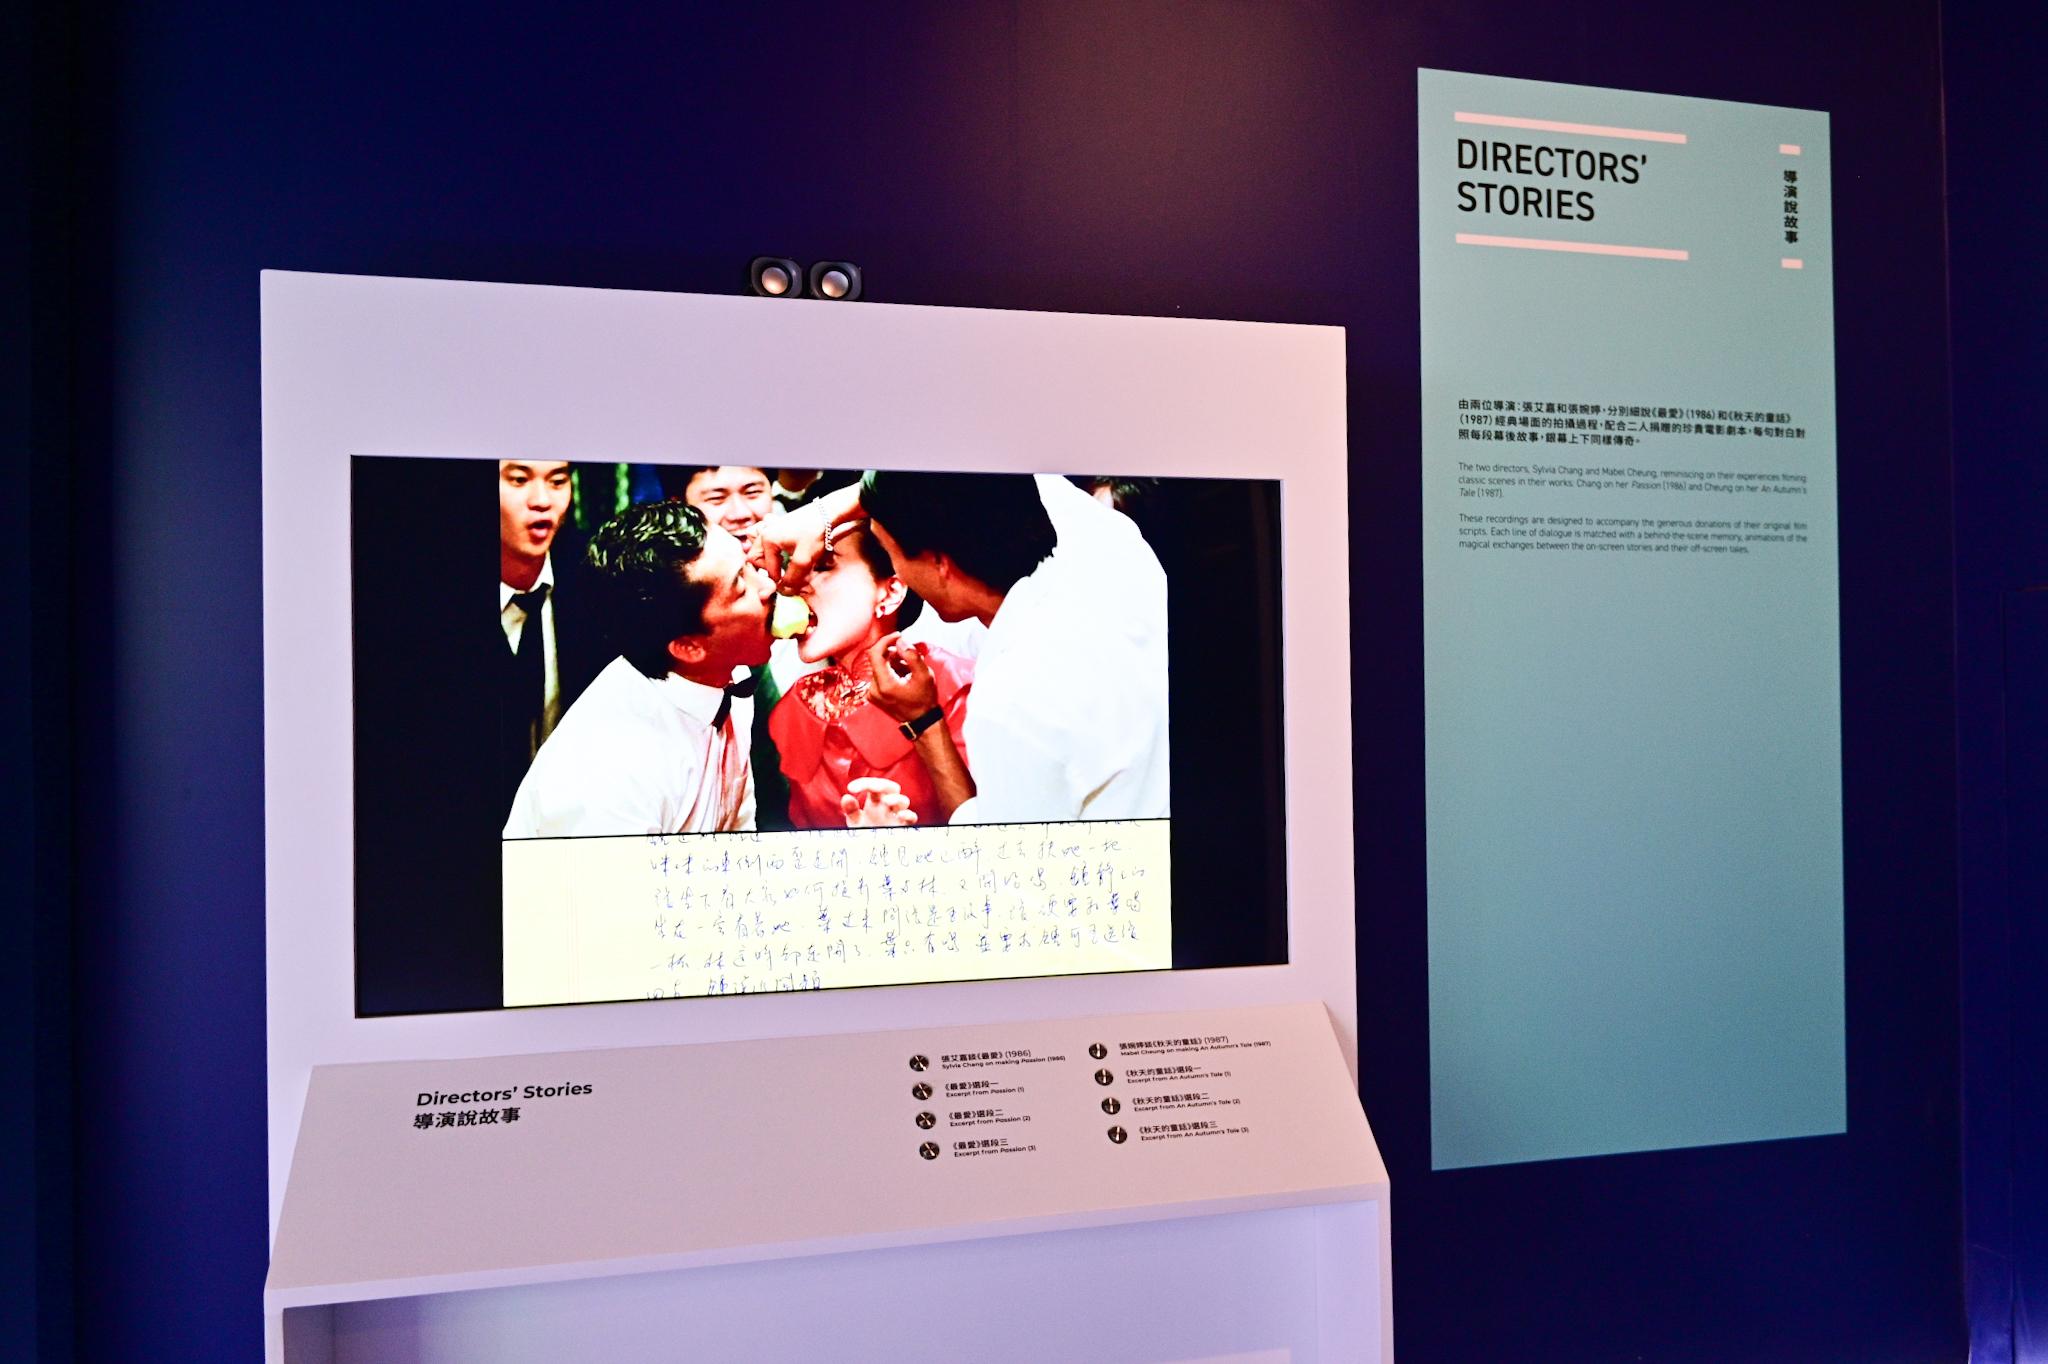 The Hong Kong Film Archive (HKFA) of the Leisure and Cultural Services Department launched the "More Brilliance, Still Different - The D & B Story Redux" exhibition from today (July 29) to February 12 next year at the Exhibition Hall of the HKFA. Photo shows a recording in correlation with the script line of the film "Passion", featuring a behind-the-scene memory, recalling the filming experiences of classic scenes.